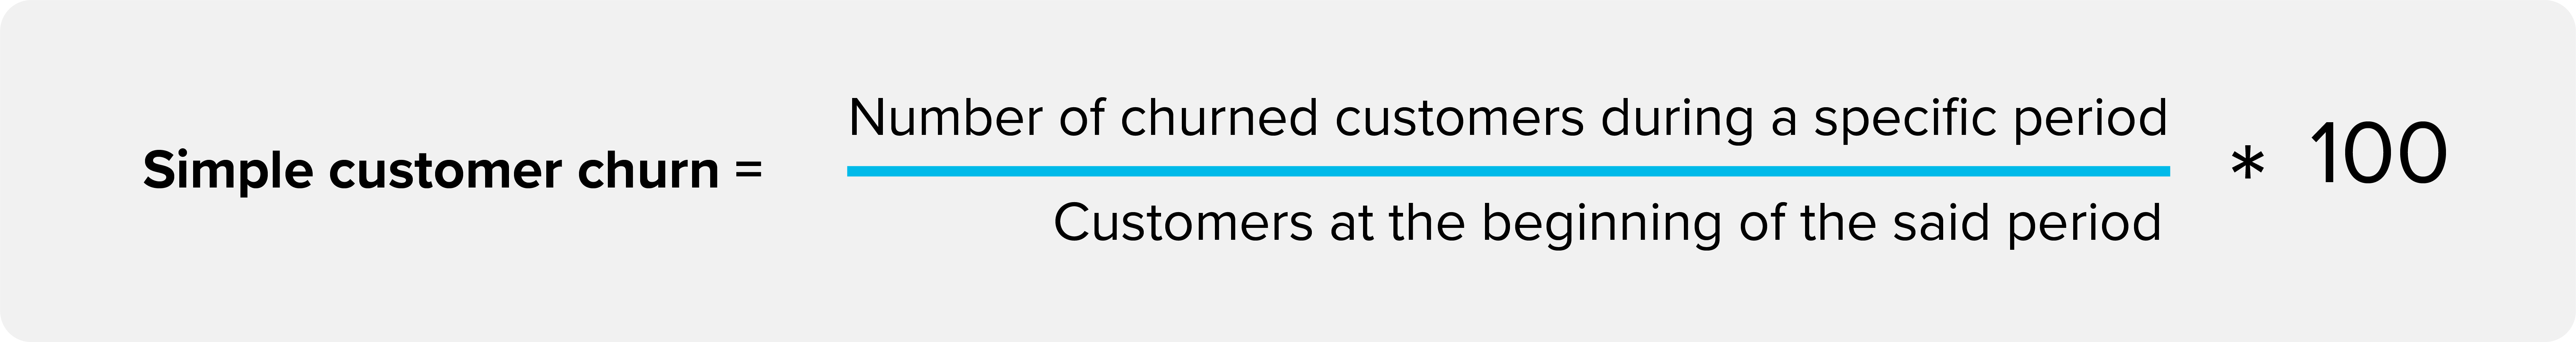 Formula to calculate simple customer churn rate for a specific period